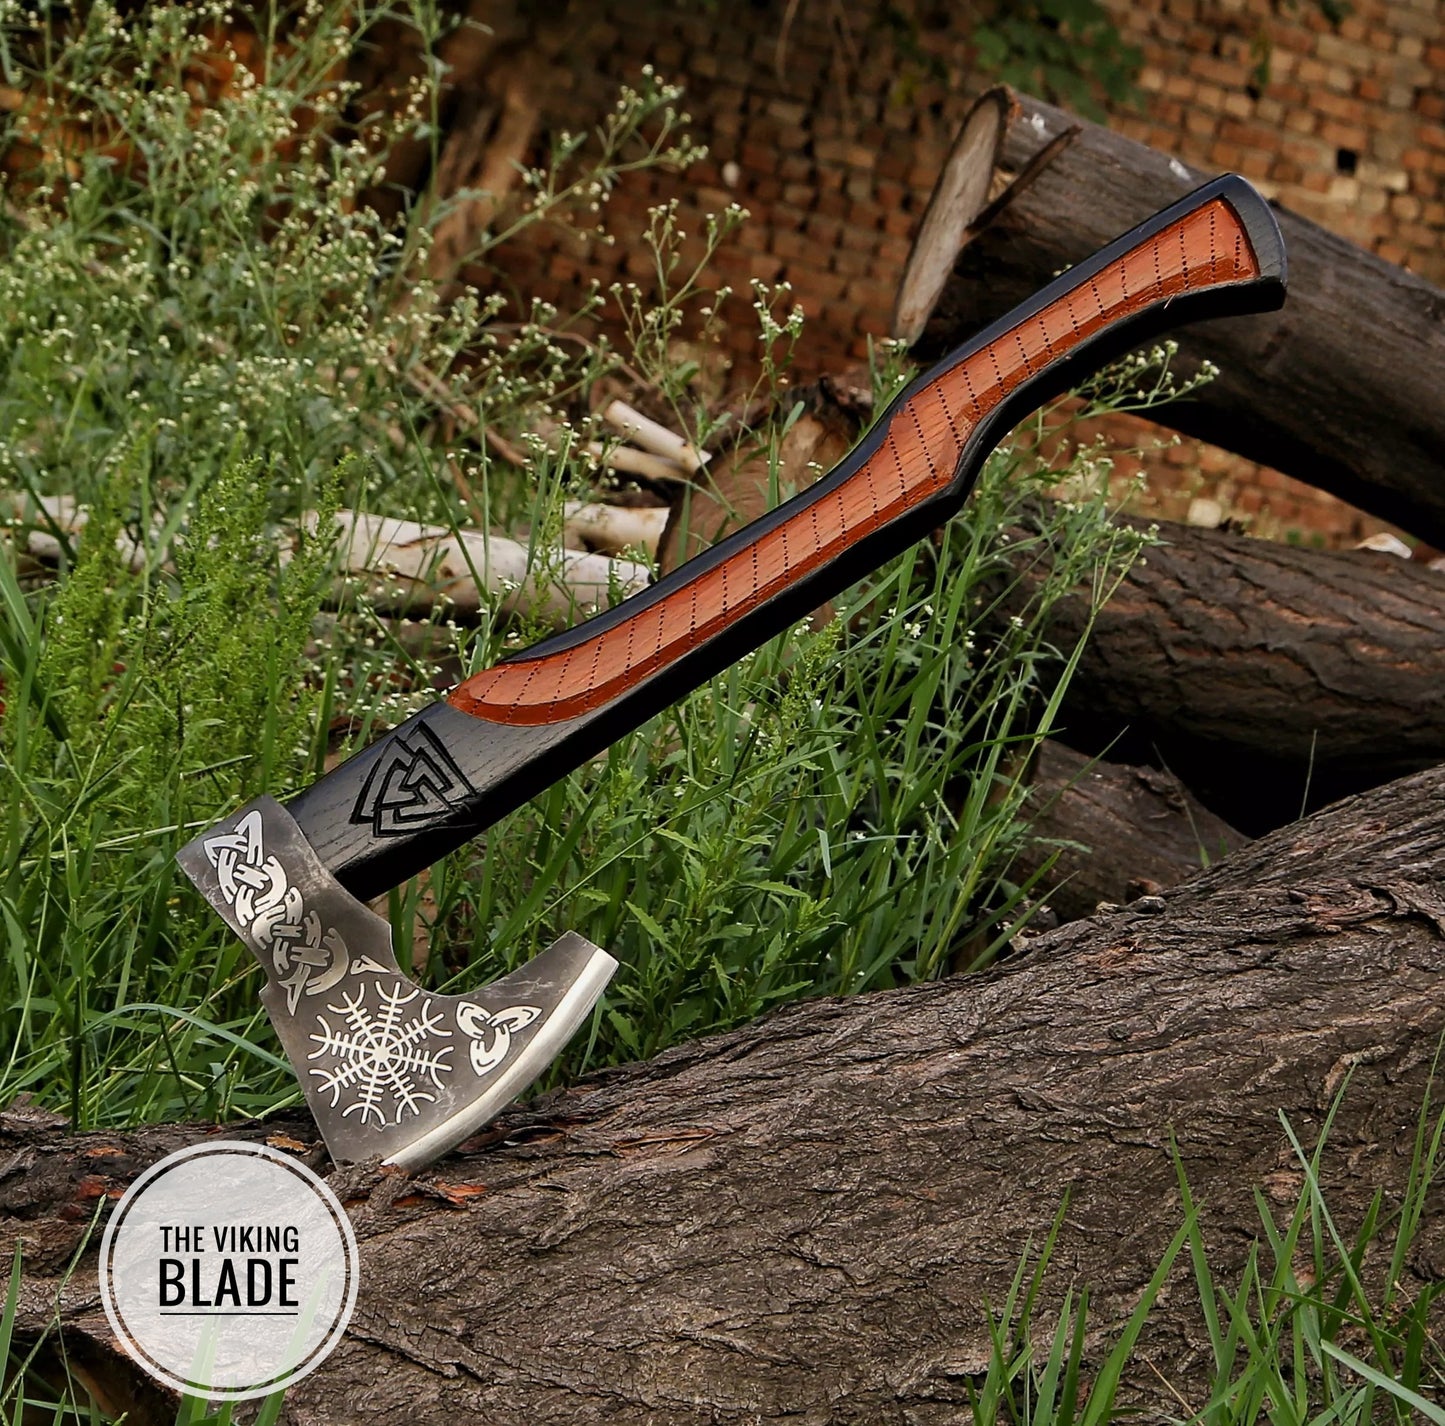 Custom Hand Forged Carbon Steel Vikings Axe With Leather Sheath |The Viking Blade|